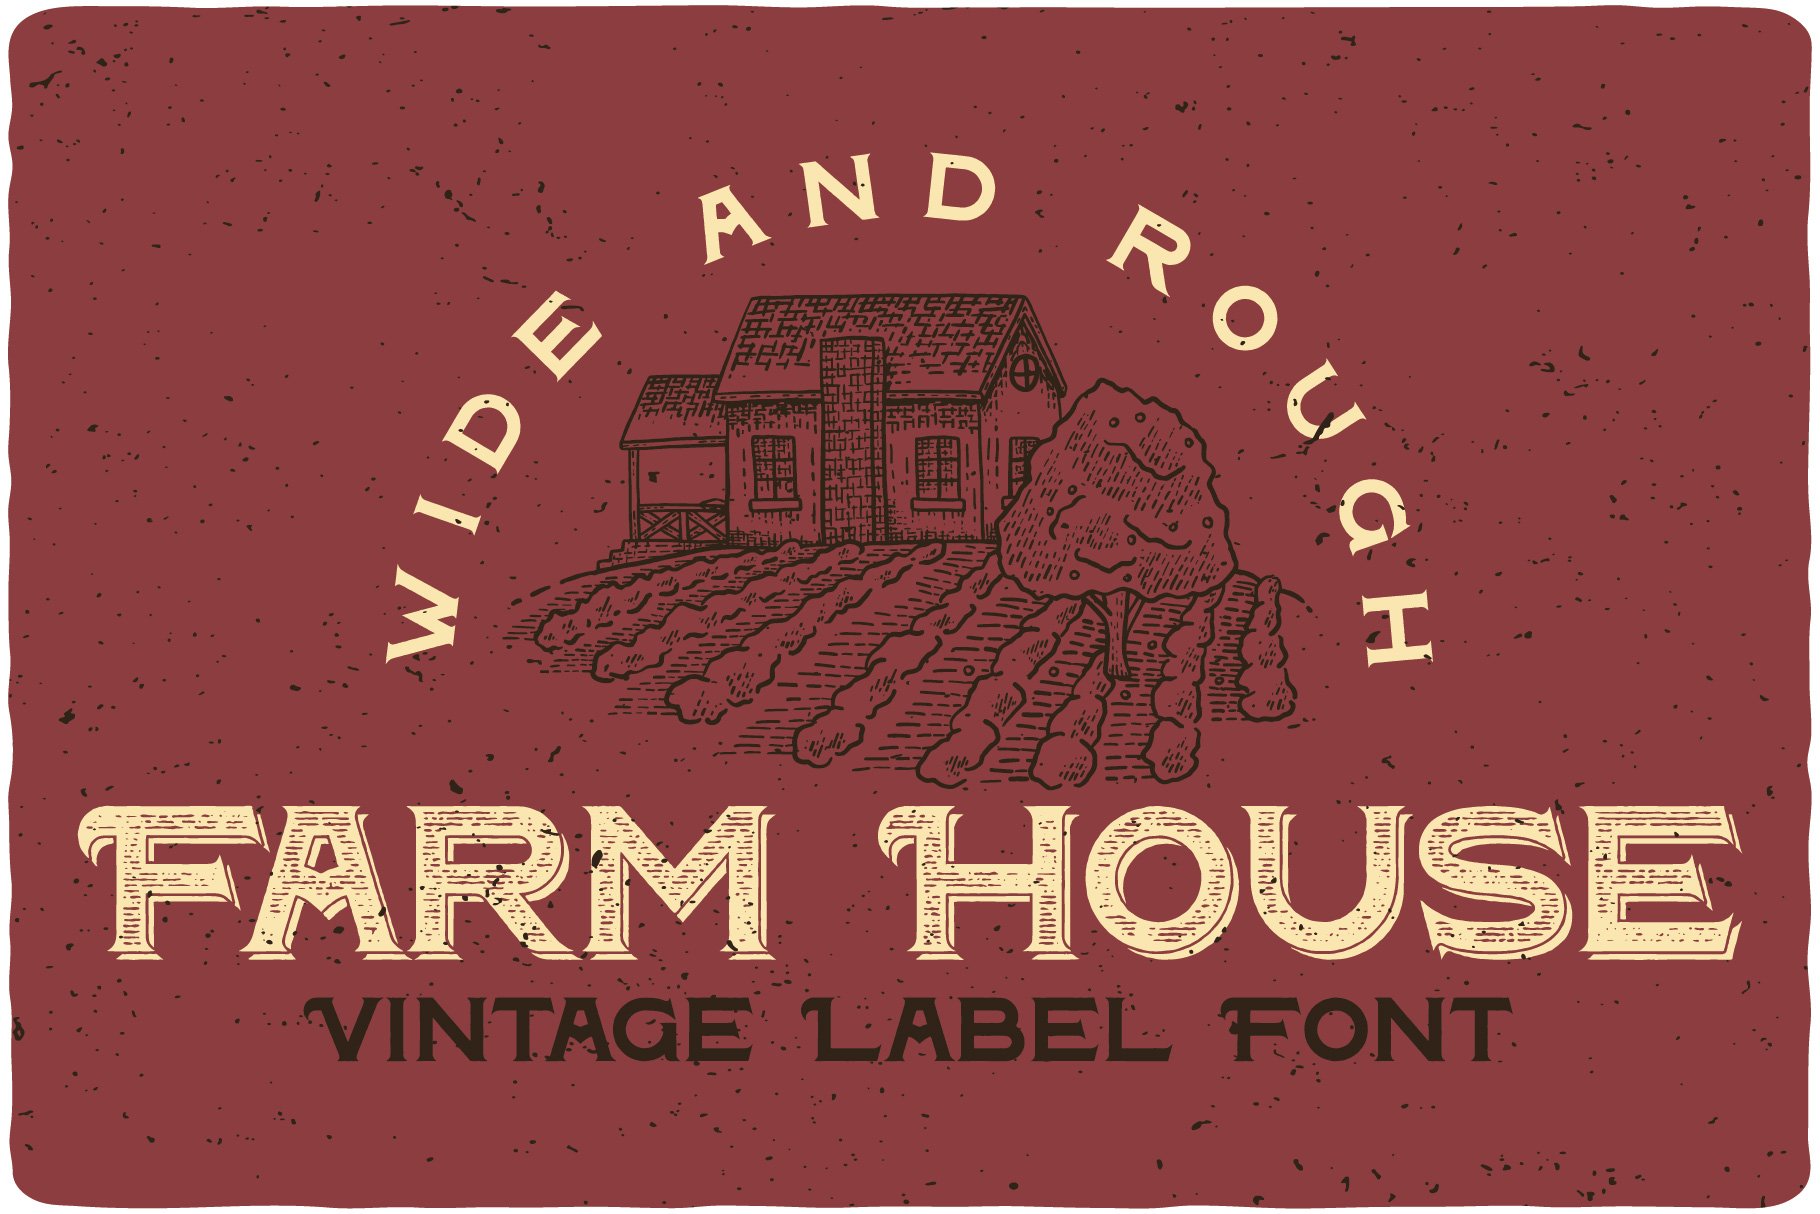 Farm House Typeface cover image.